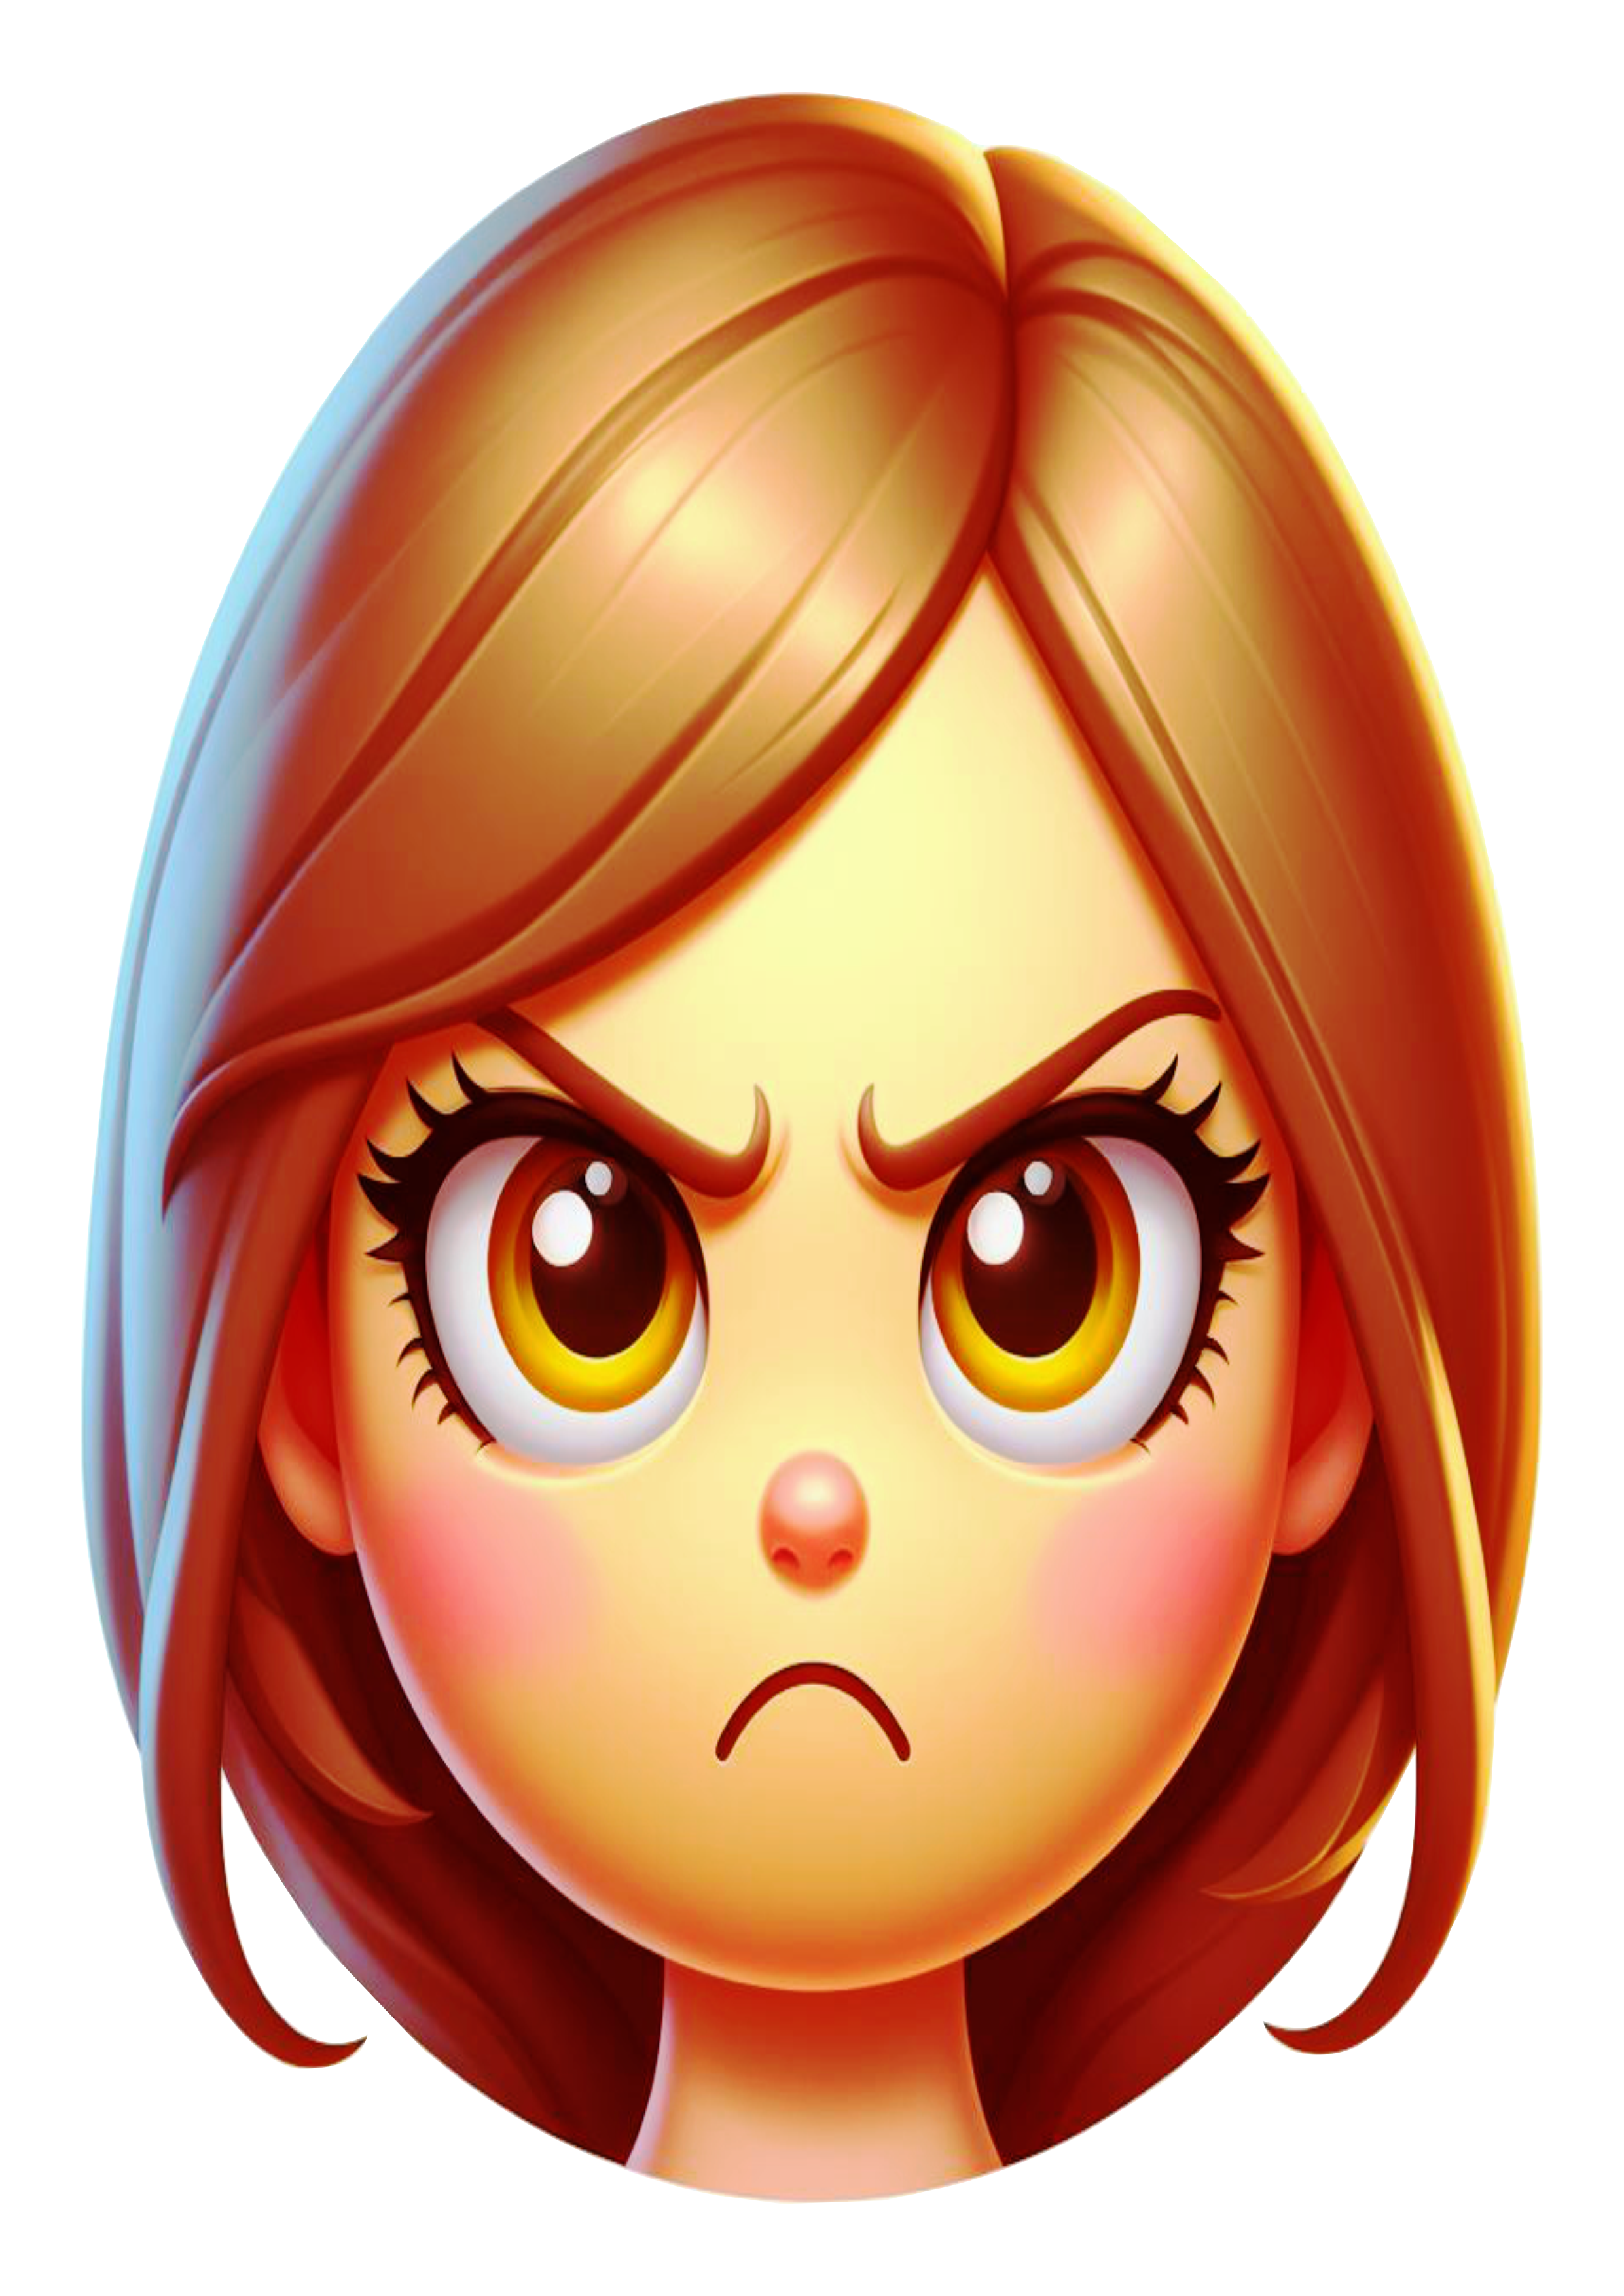 Emoticon Angry Woman Emojis Free PNG Transparent Background Clipart